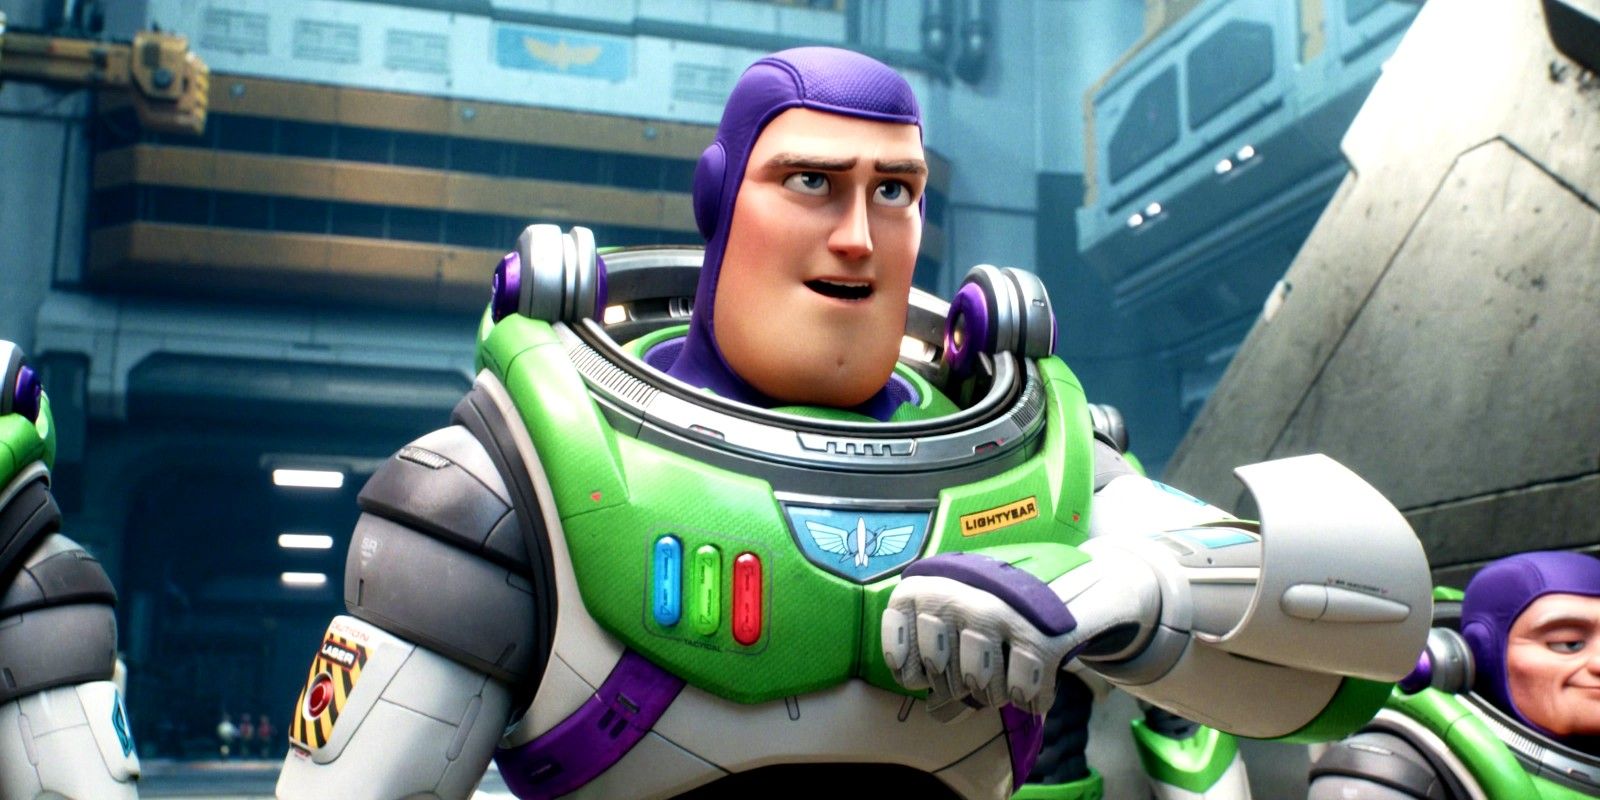 Buzz Lightyear wearing his purple, white, and green suit while talking to someone in Lightyear